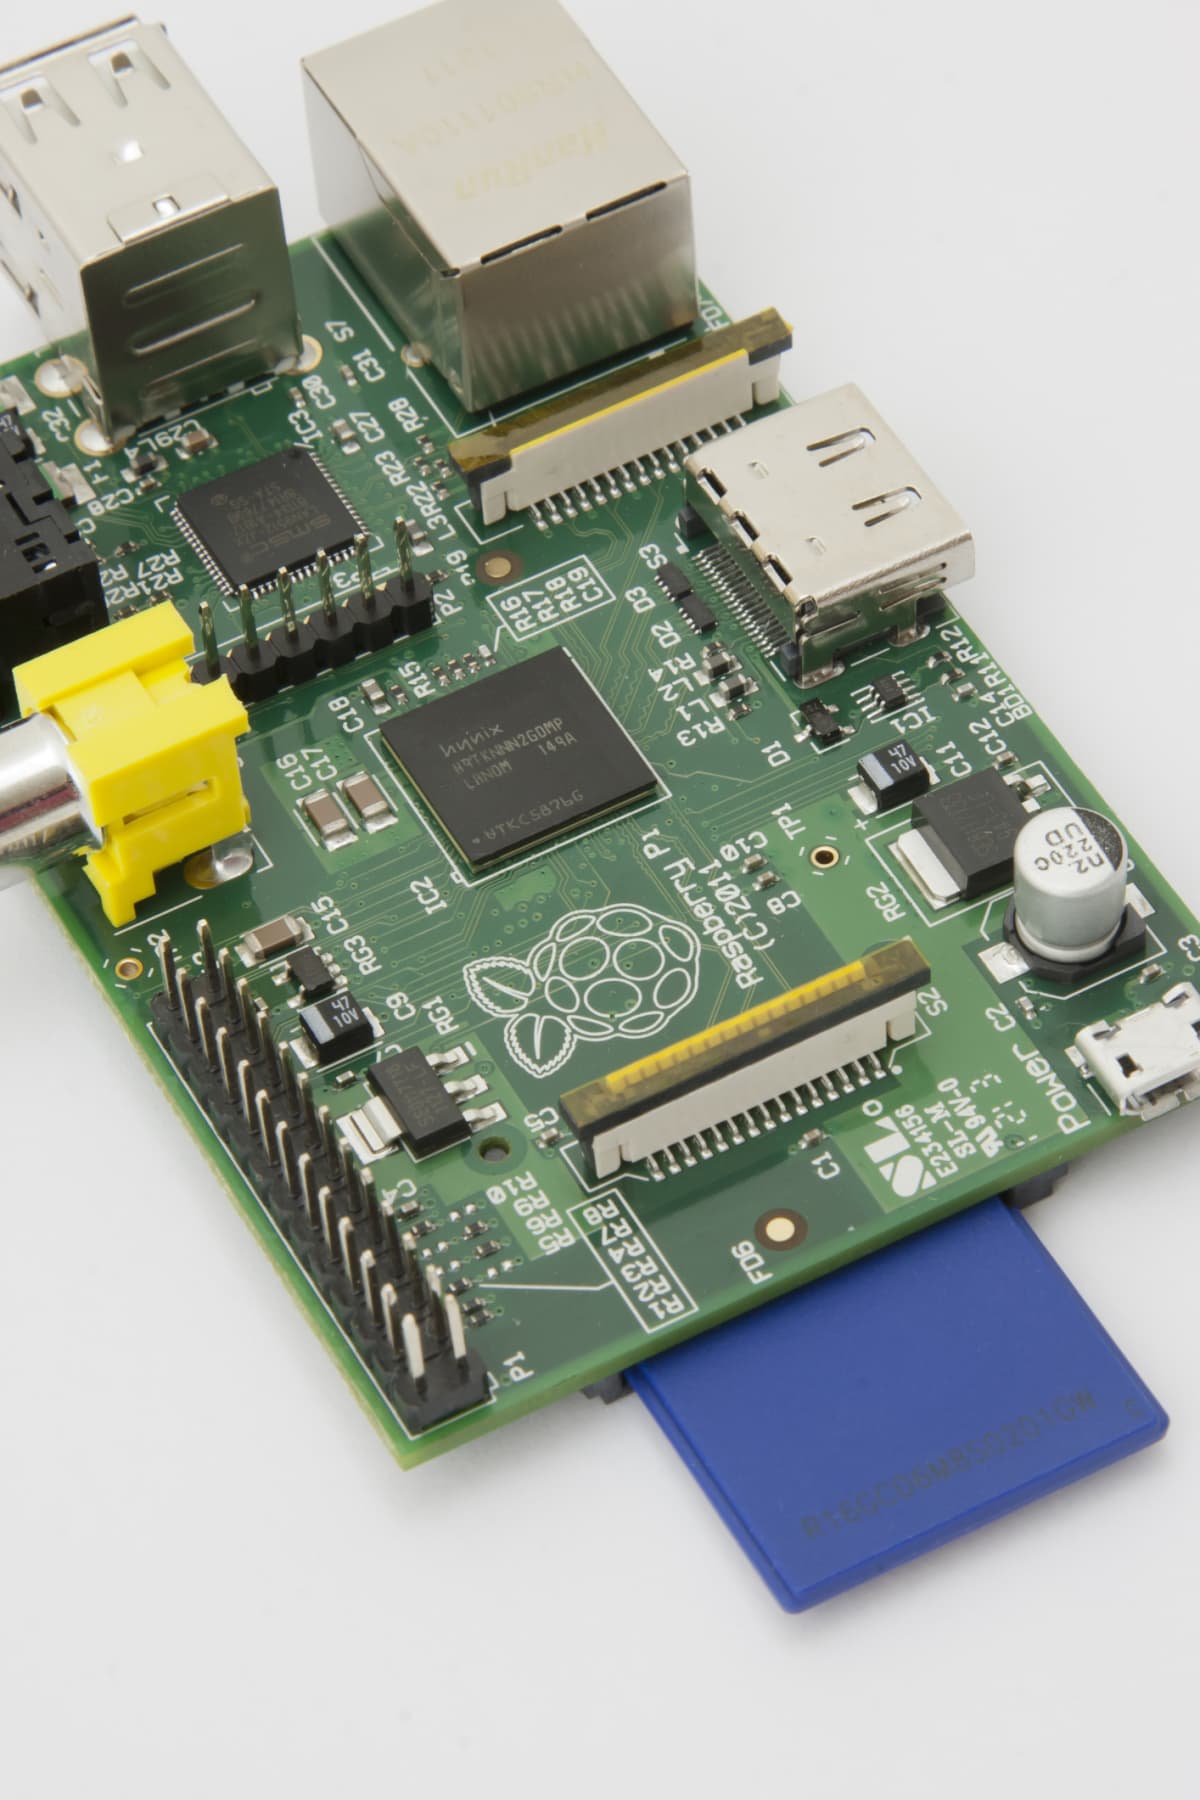 Leighton Buzzard, Bedfordshire, England - May 10, 2012: The Raspberry PI is a micro computer developed by the Raspberry Pi Foundation with the aim to teach school children how to program.  At only $30 the Raspberry Pi is very affordable.